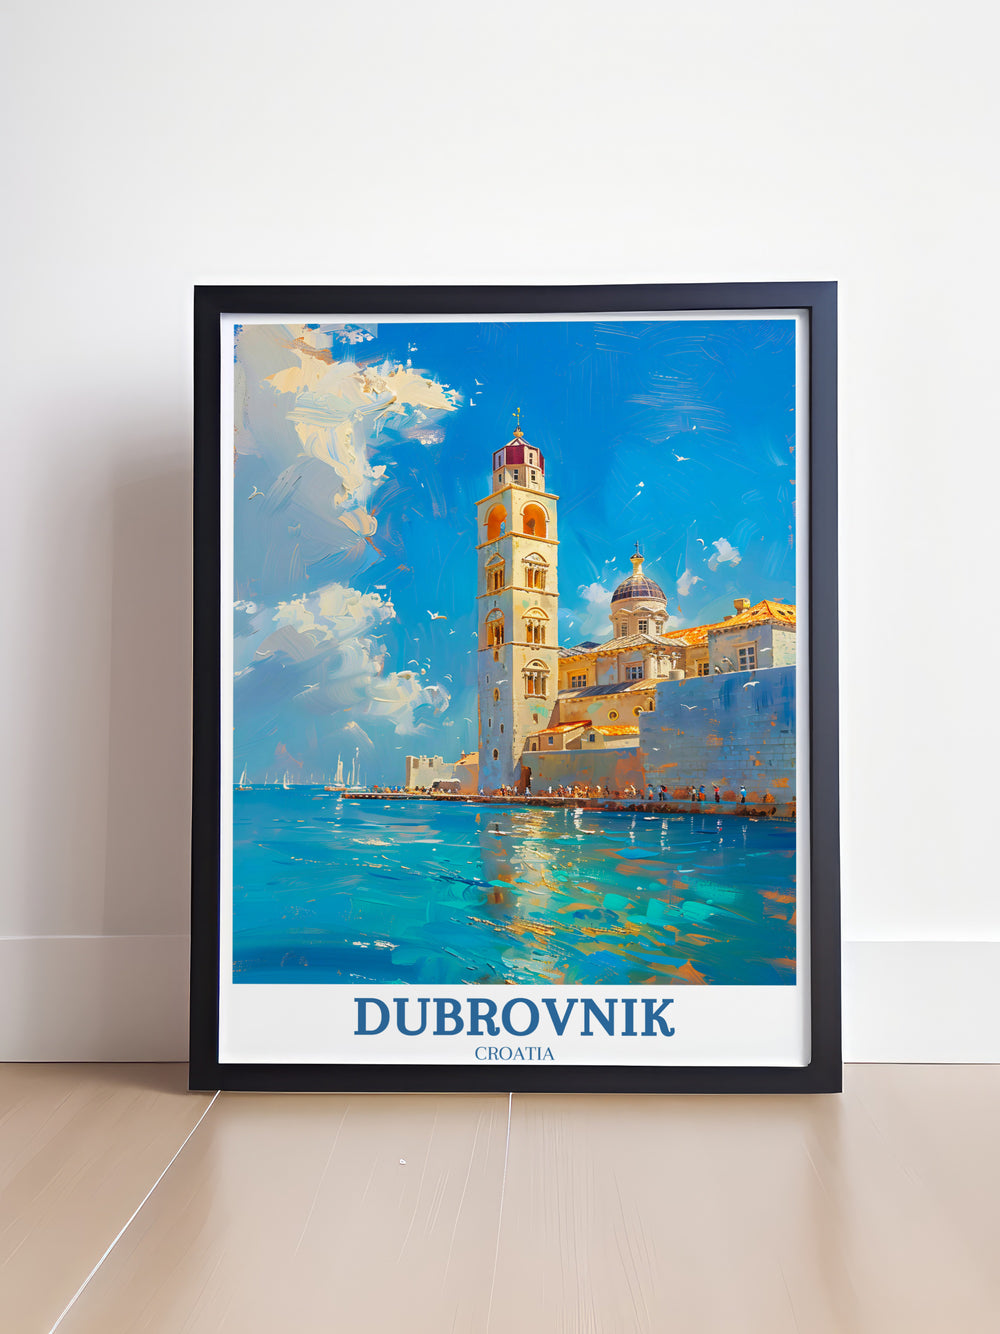 A captivating Dubrovnik poster featuring the iconic Dubrovnik Cathedral against a backdrop of terracotta rooftops and azure seas